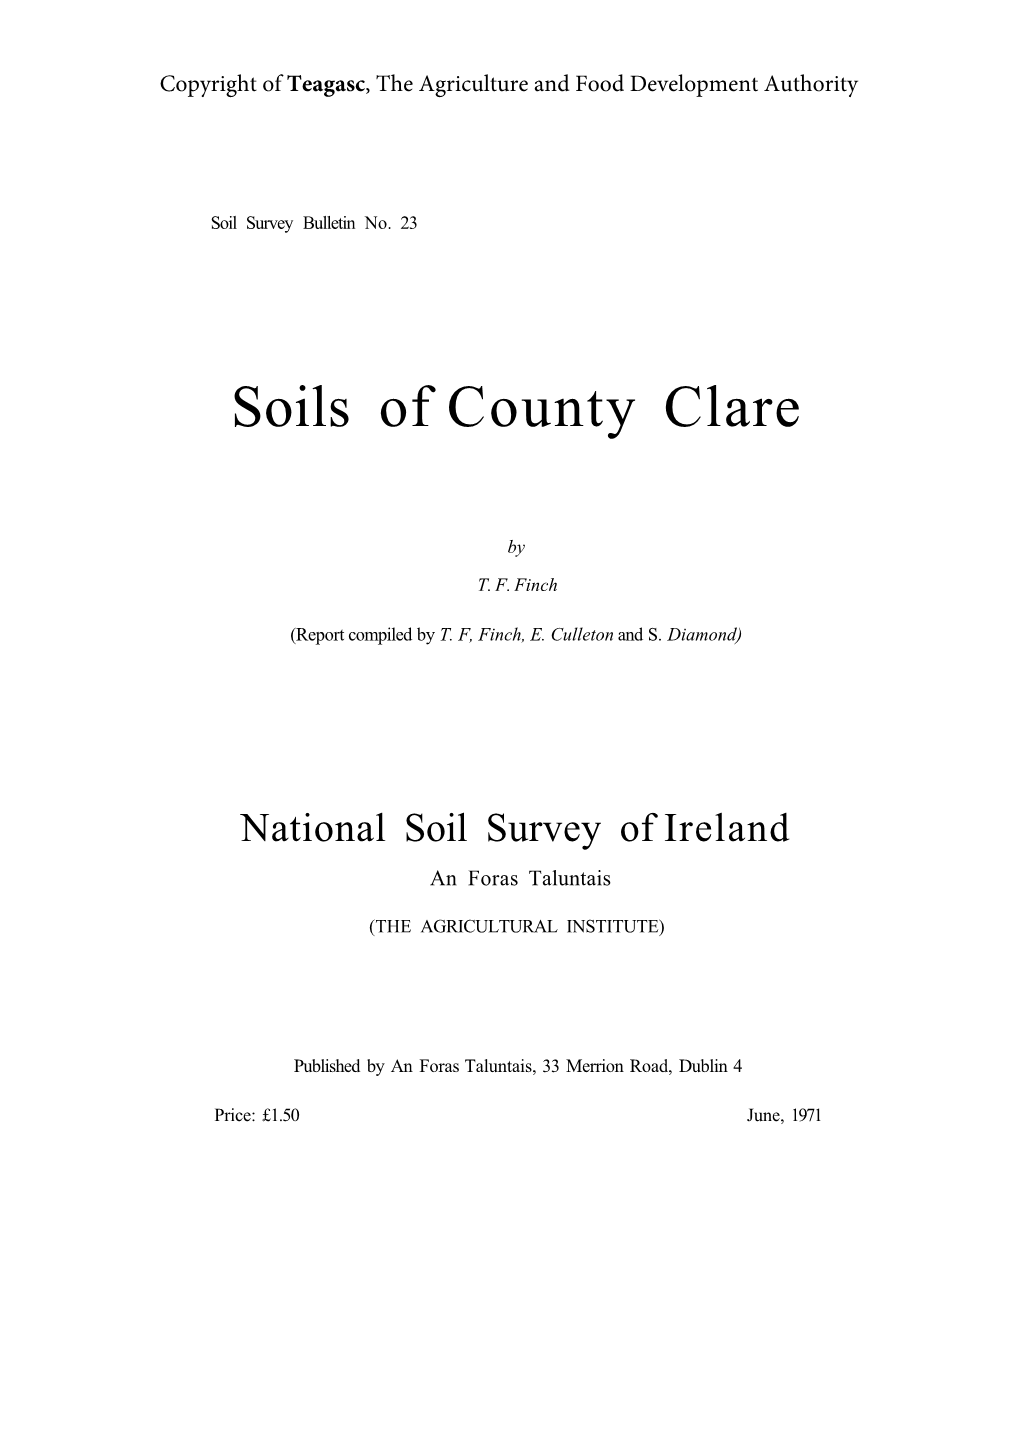 Soils of County Clare